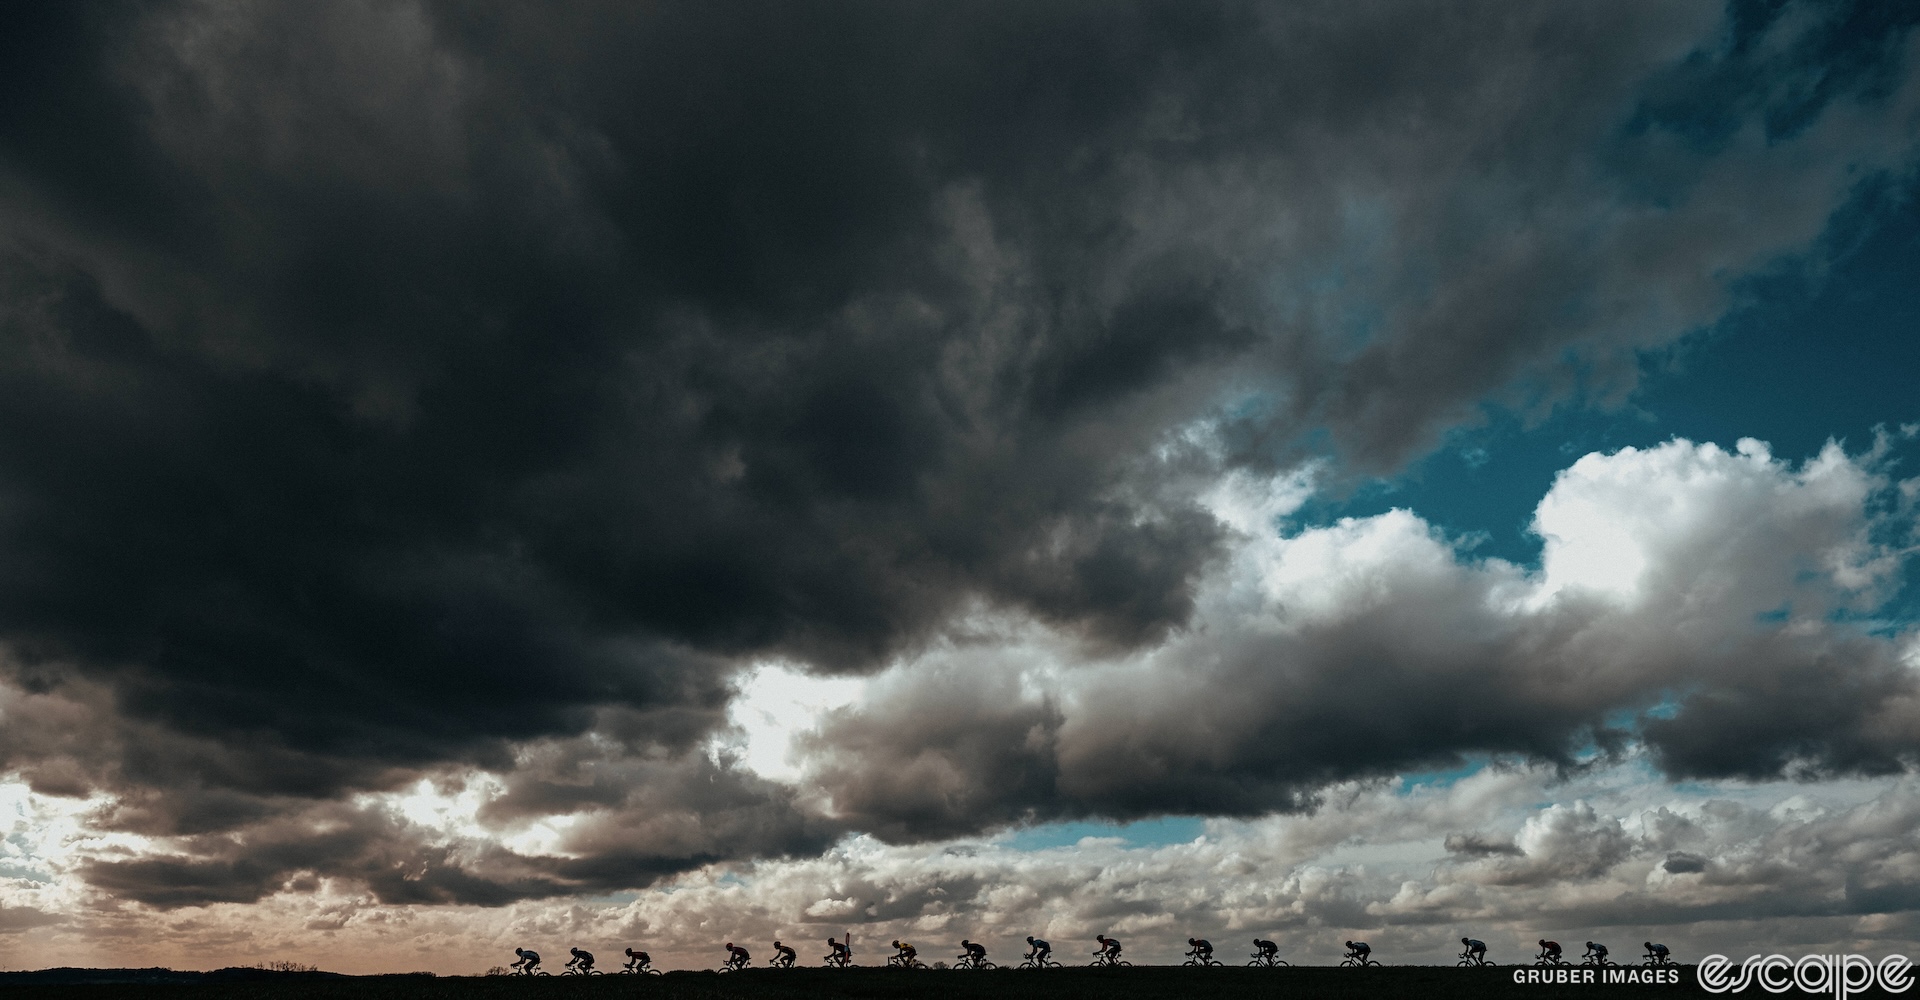 A line of racers stretches out in silhouette against a low, flat landscape. Dark, foreboding clouds loom overhead, broken by blue sky and streaks of sunlight. 